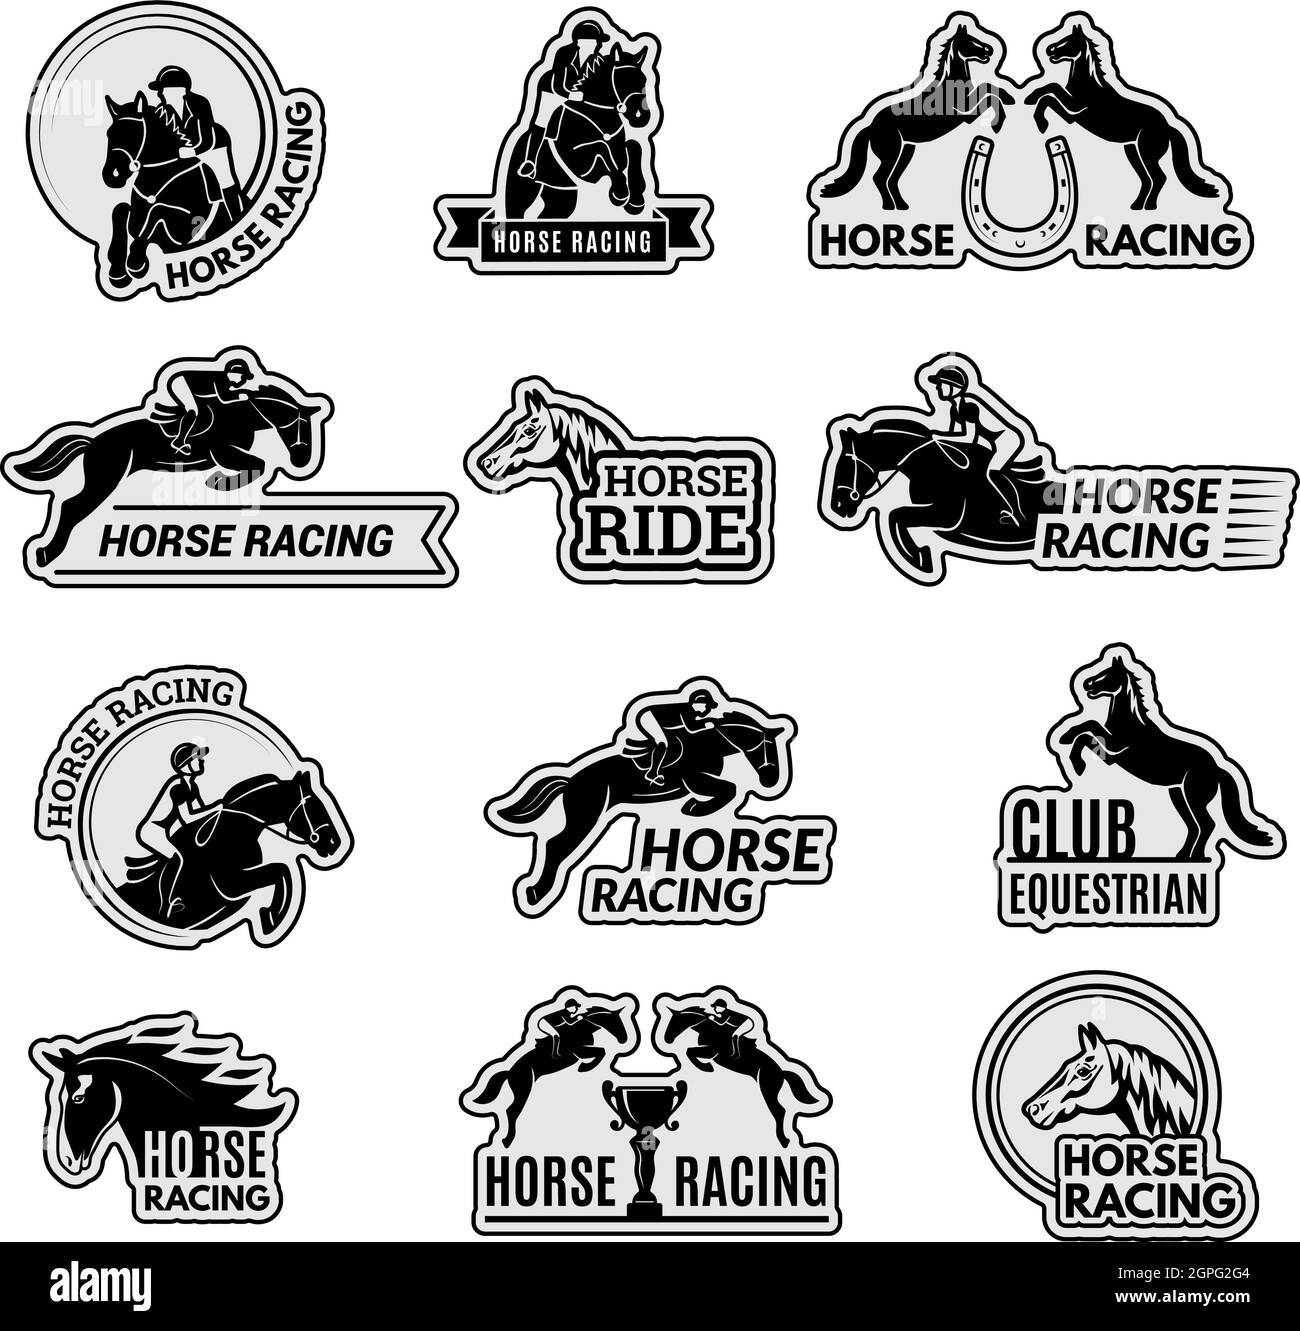 Equestrian club logo. Racehorse sport emblems collection stallion domestic riding animals vector pictures Stock Vector